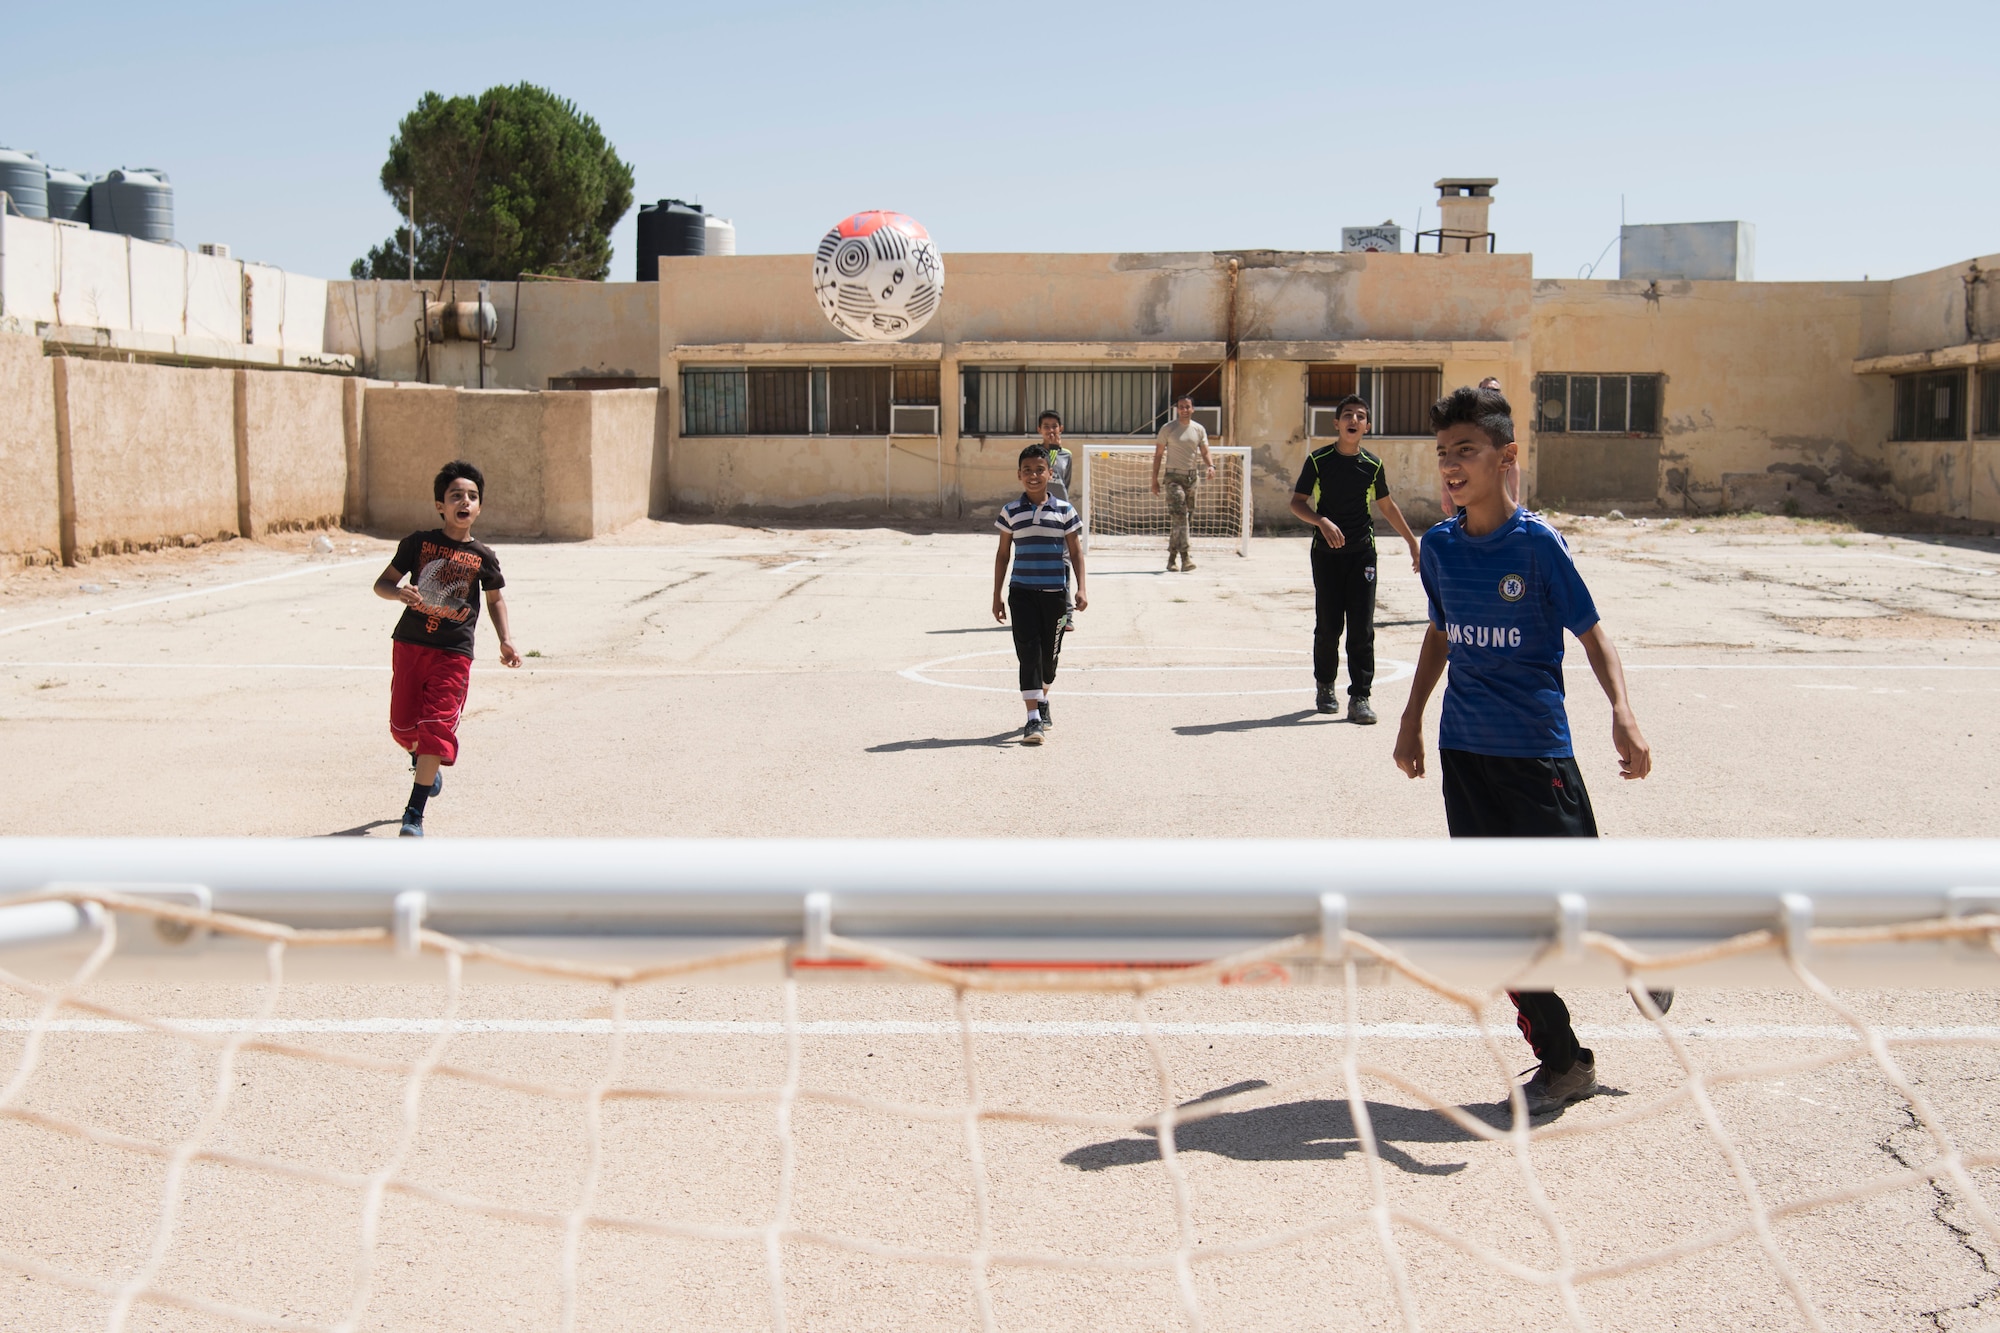 332nd Air Expeditionary Wing Airmen play soccer with local kids at an undisclosed location in Southwest Asia May 26, 2018. (U.S. Air Force photo by Senior Airman Krystal Wright)